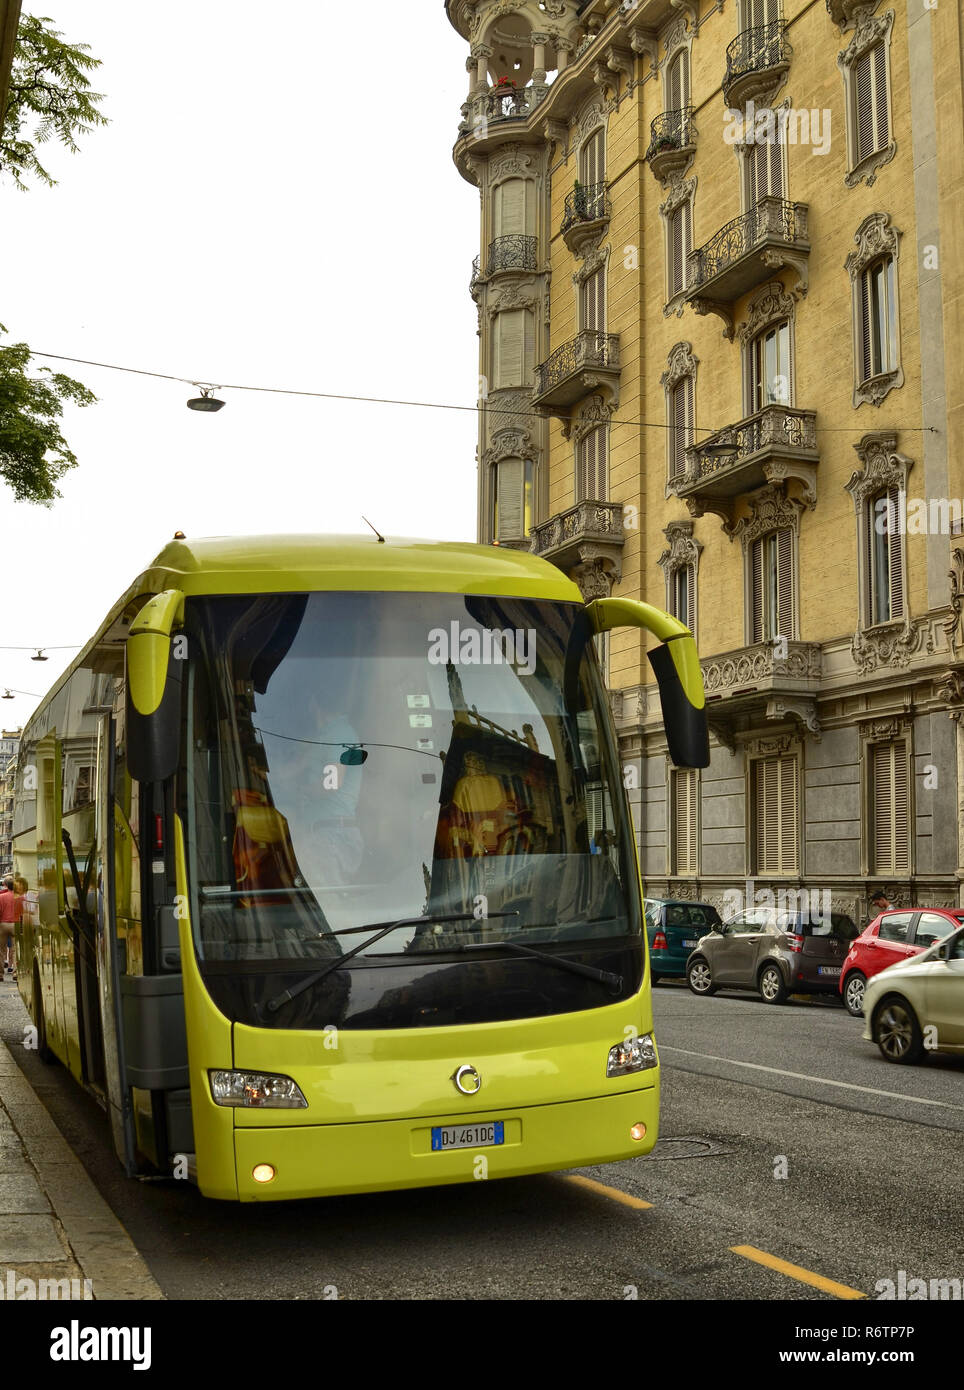 Turin, Piedmont, Italy. July 2018. Departure for the boys' summer camp: the big yellow bus is loaded with the backpacks of the boys. As everything is  Stock Photo